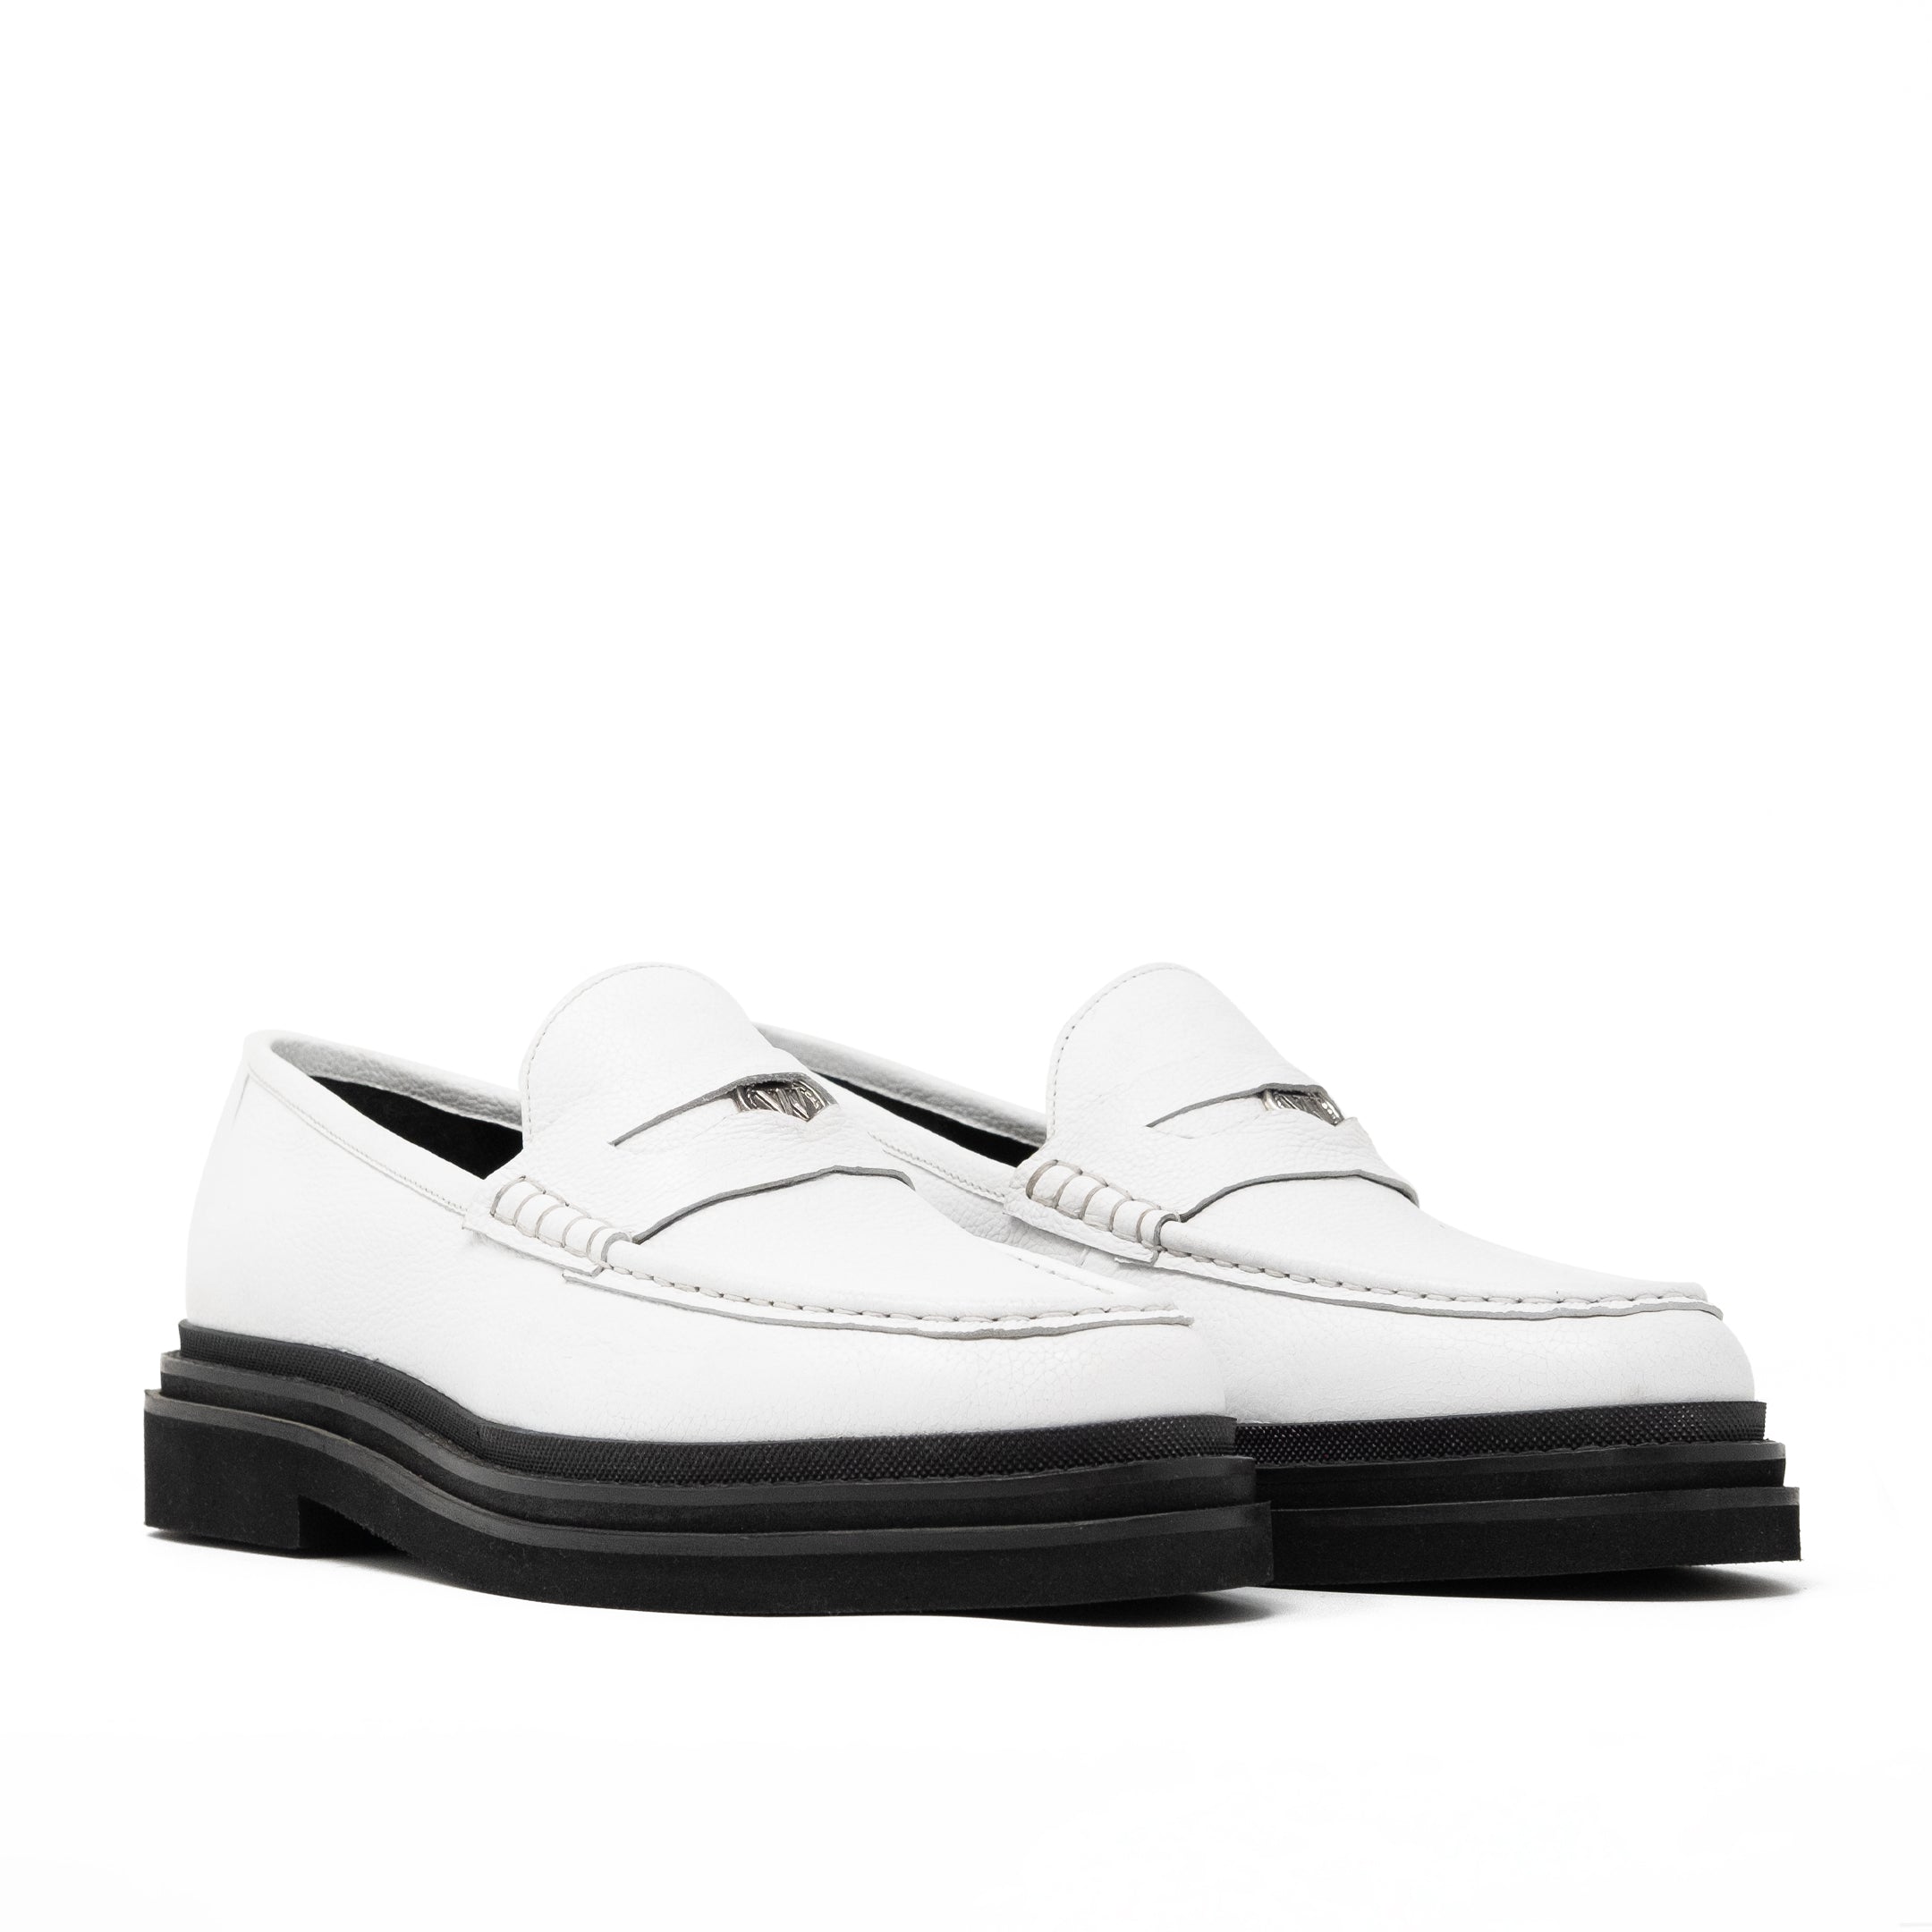 White Leather Walk London Brooklyn Penny Loafer